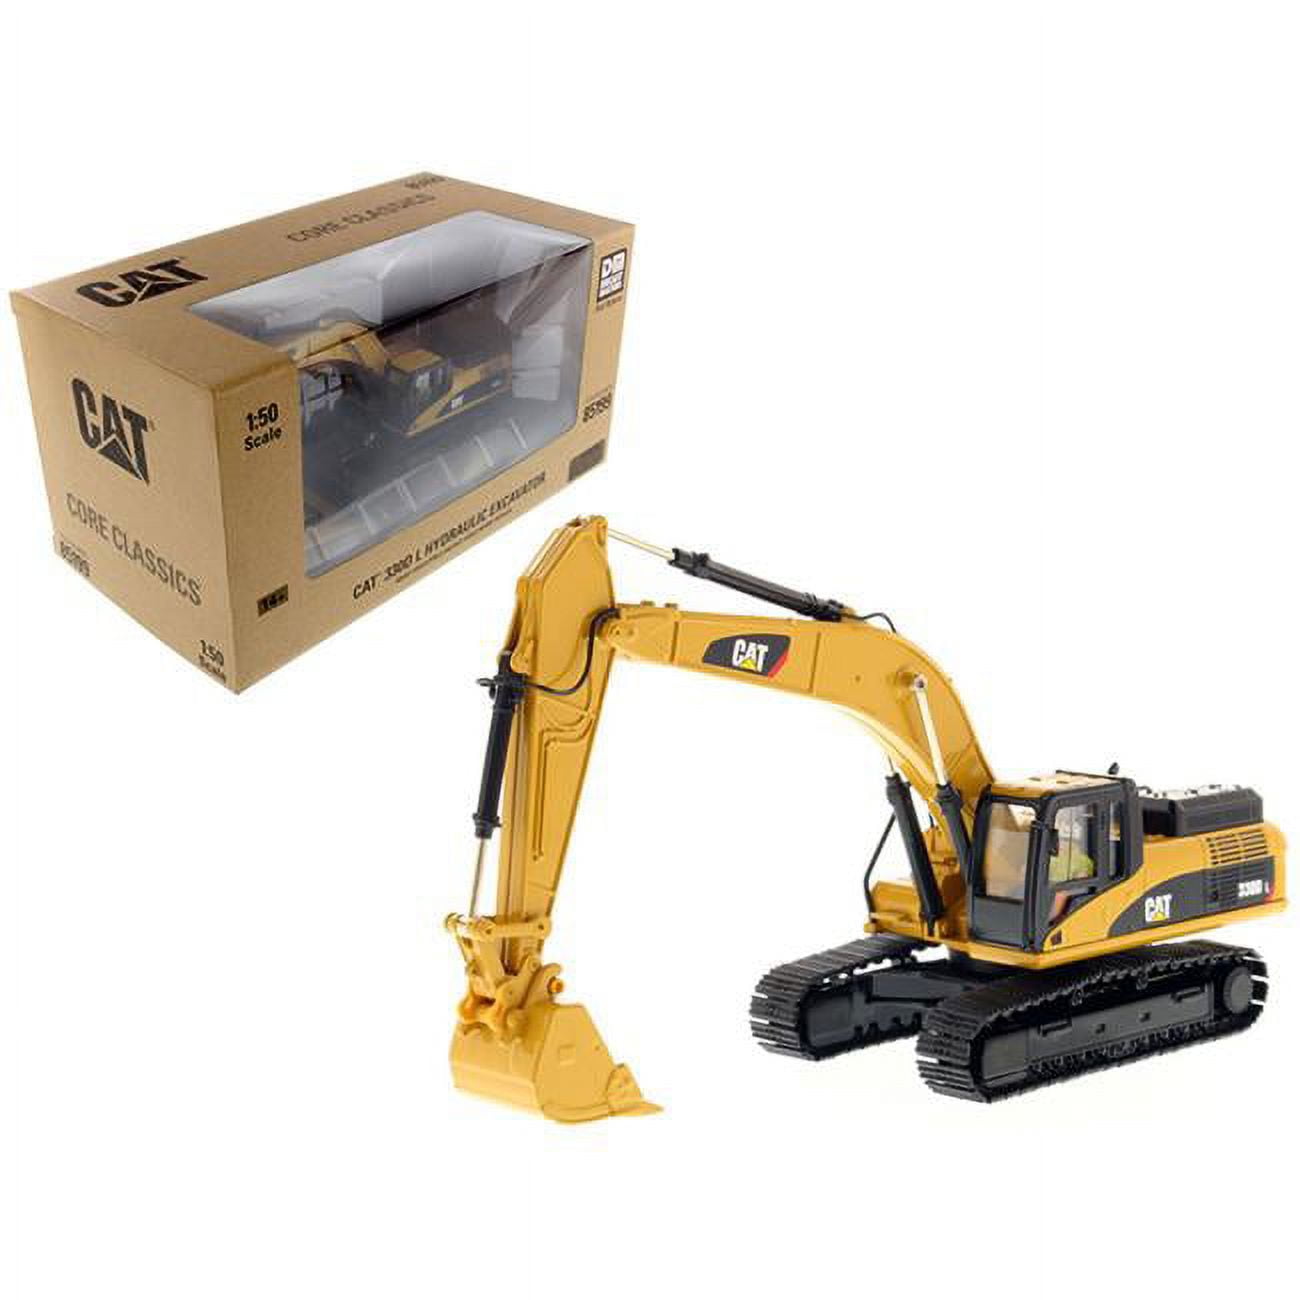 85199c 1 By 50 Scale Diecast Hydraulic Excavator For Cat Caterpillar 330d L Model